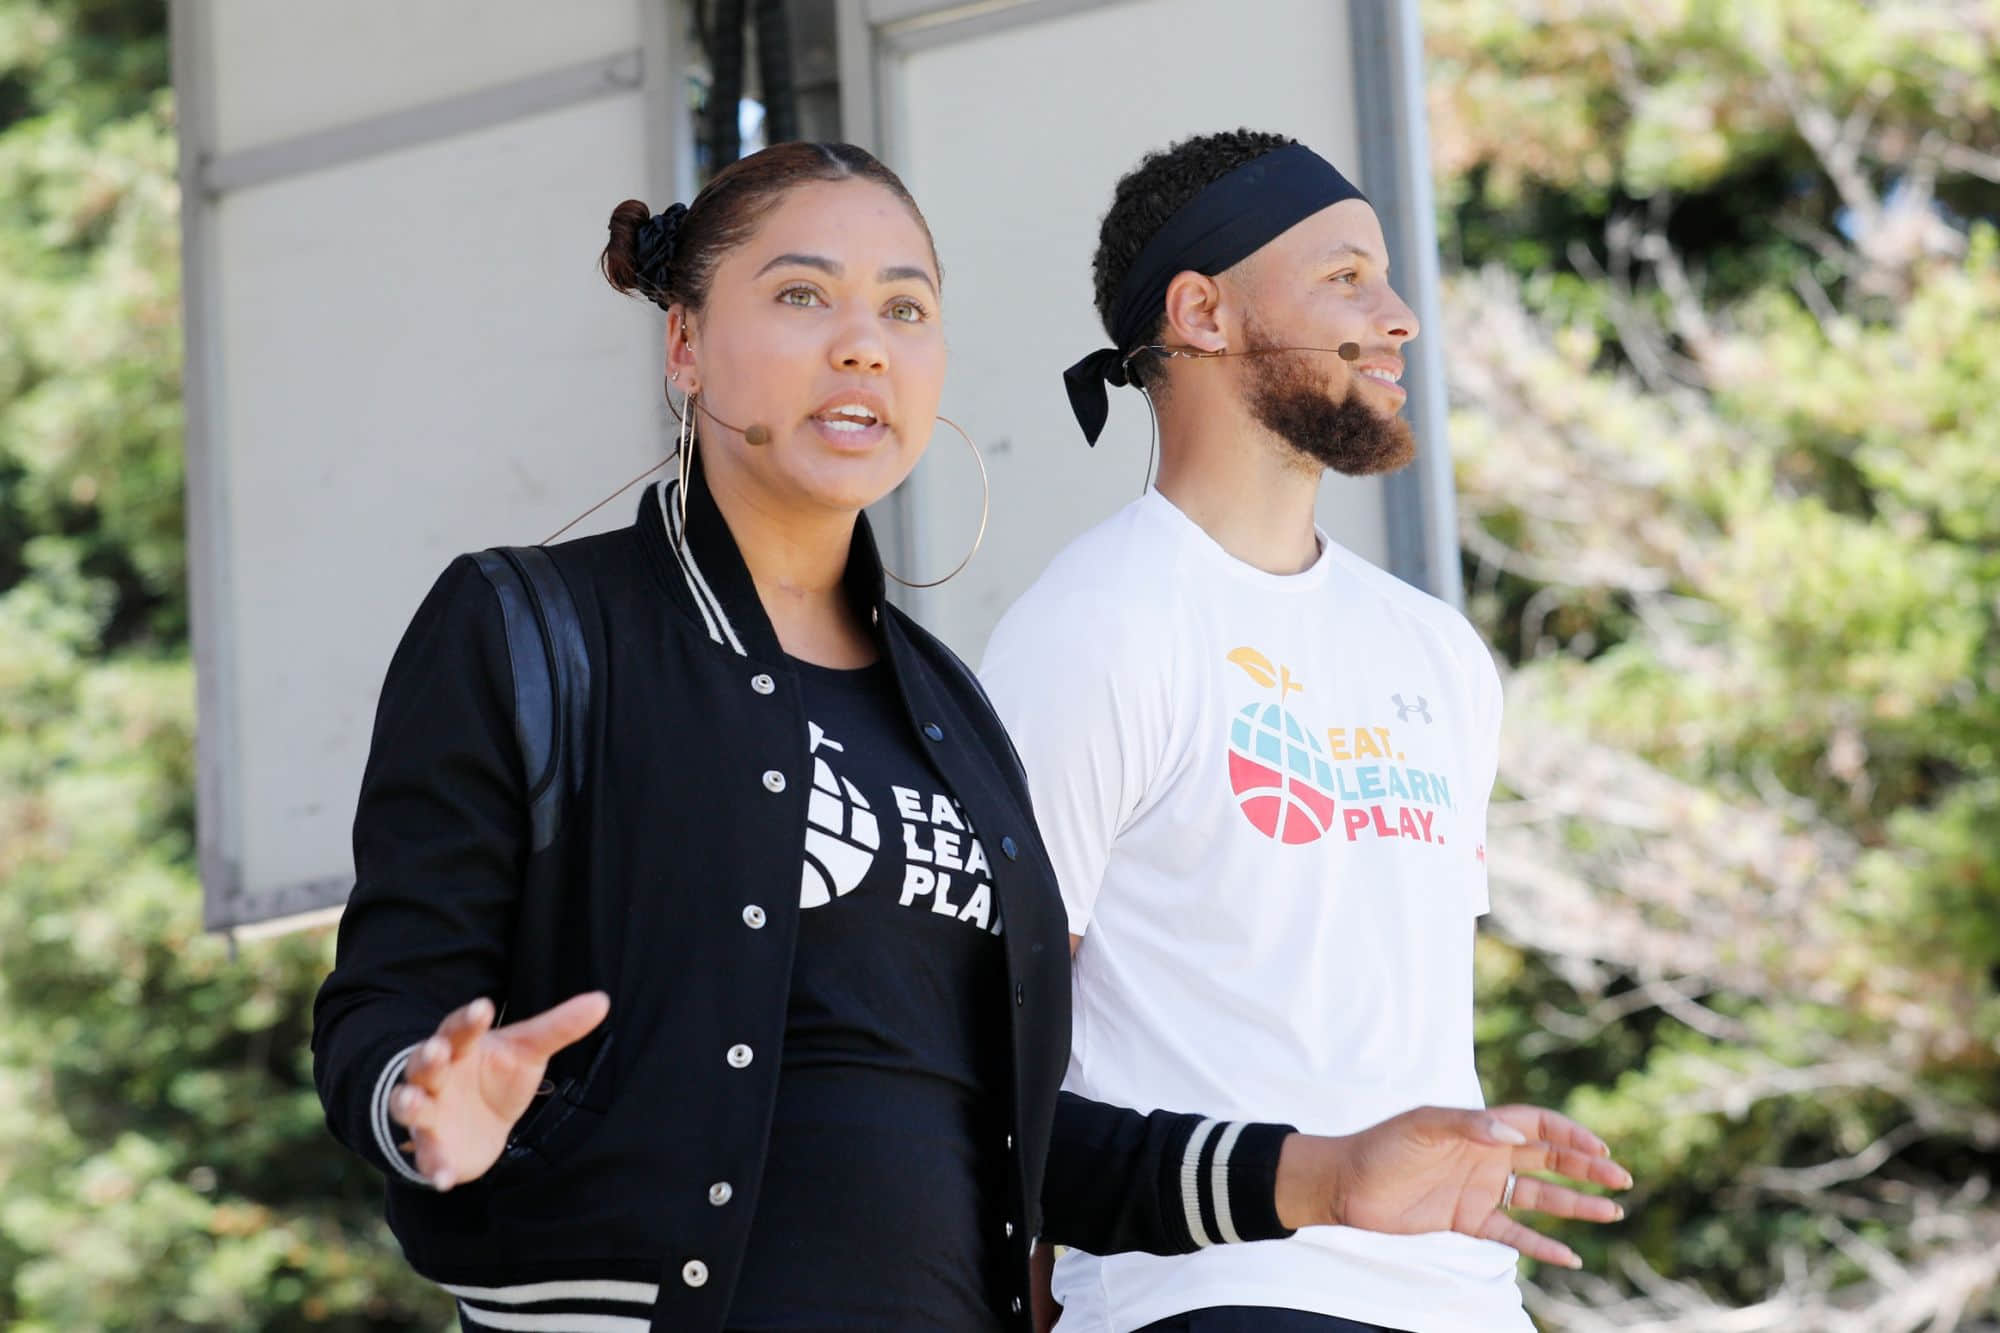 Stephen Curry and his wife enjoyed a vacation in Hawaii on their wedding anniversary